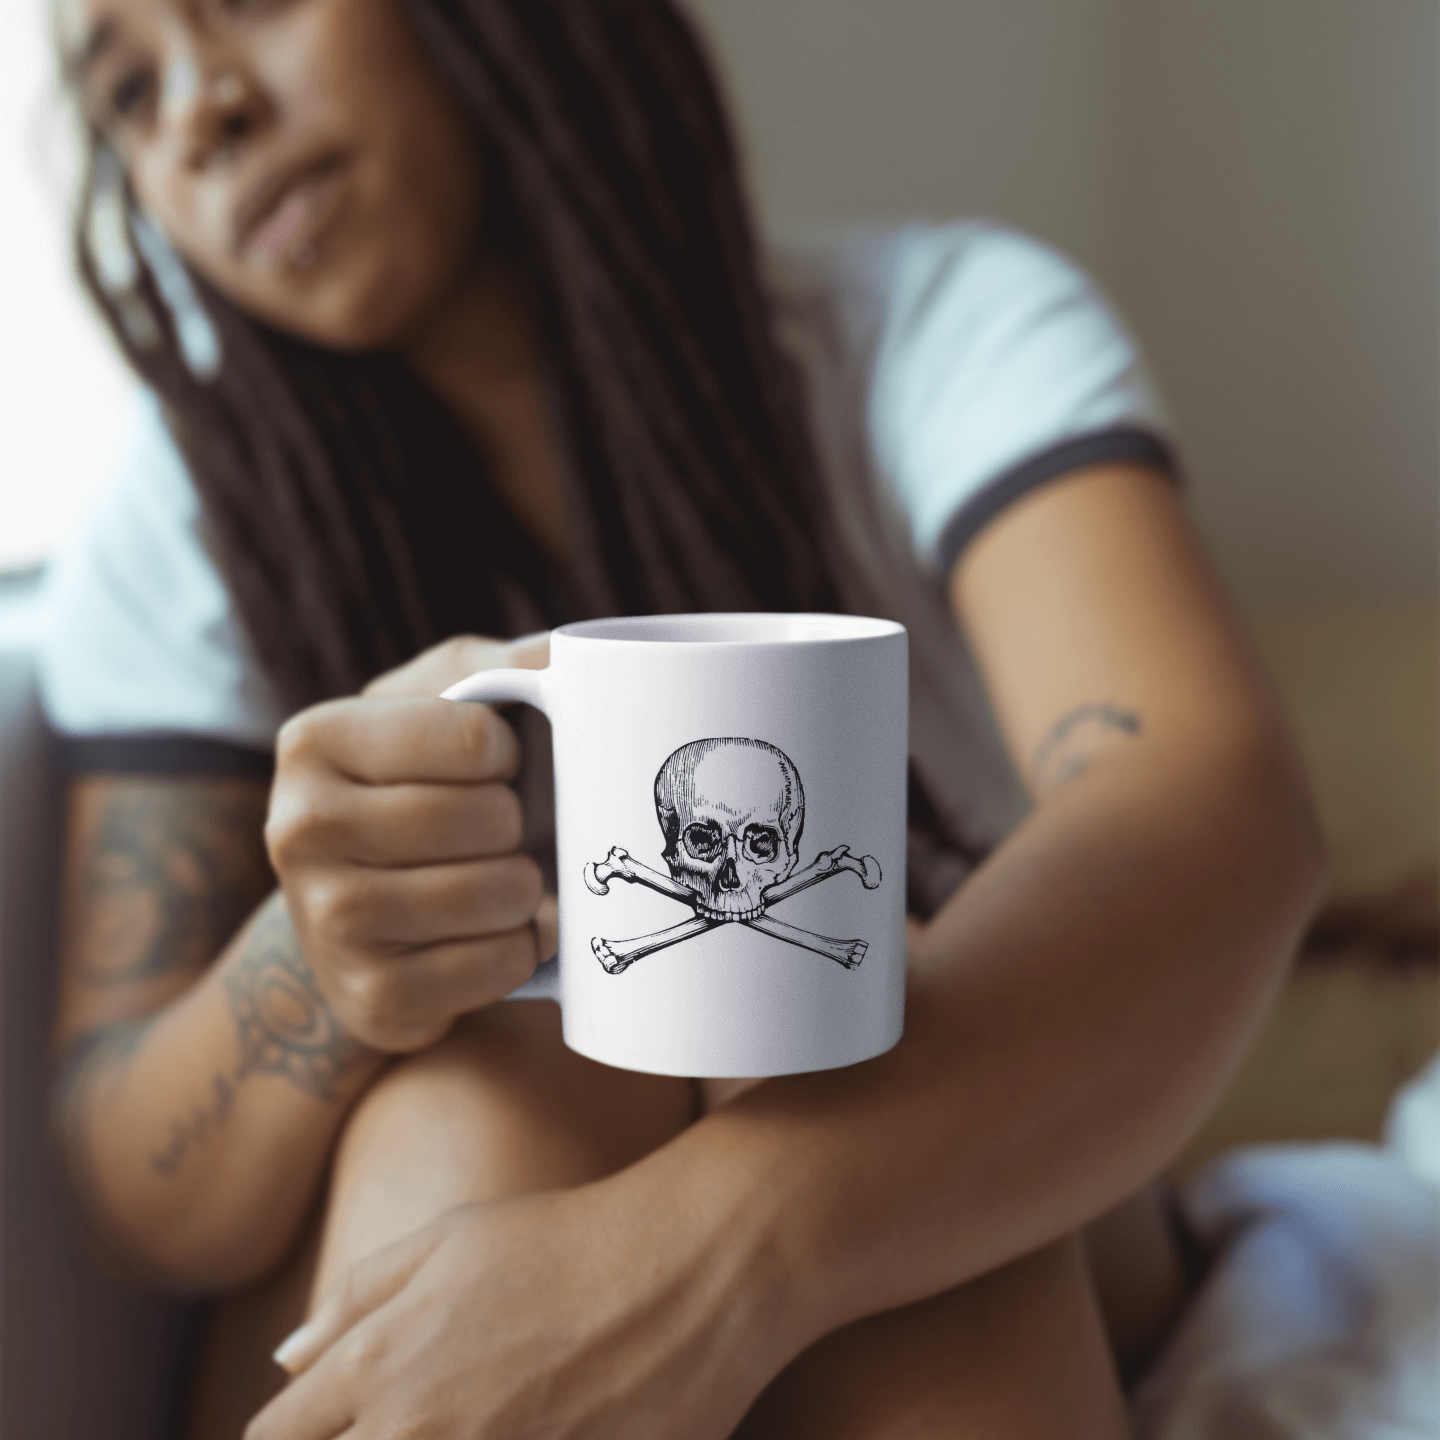 Woman holding white coffee mug with skull and crossbones